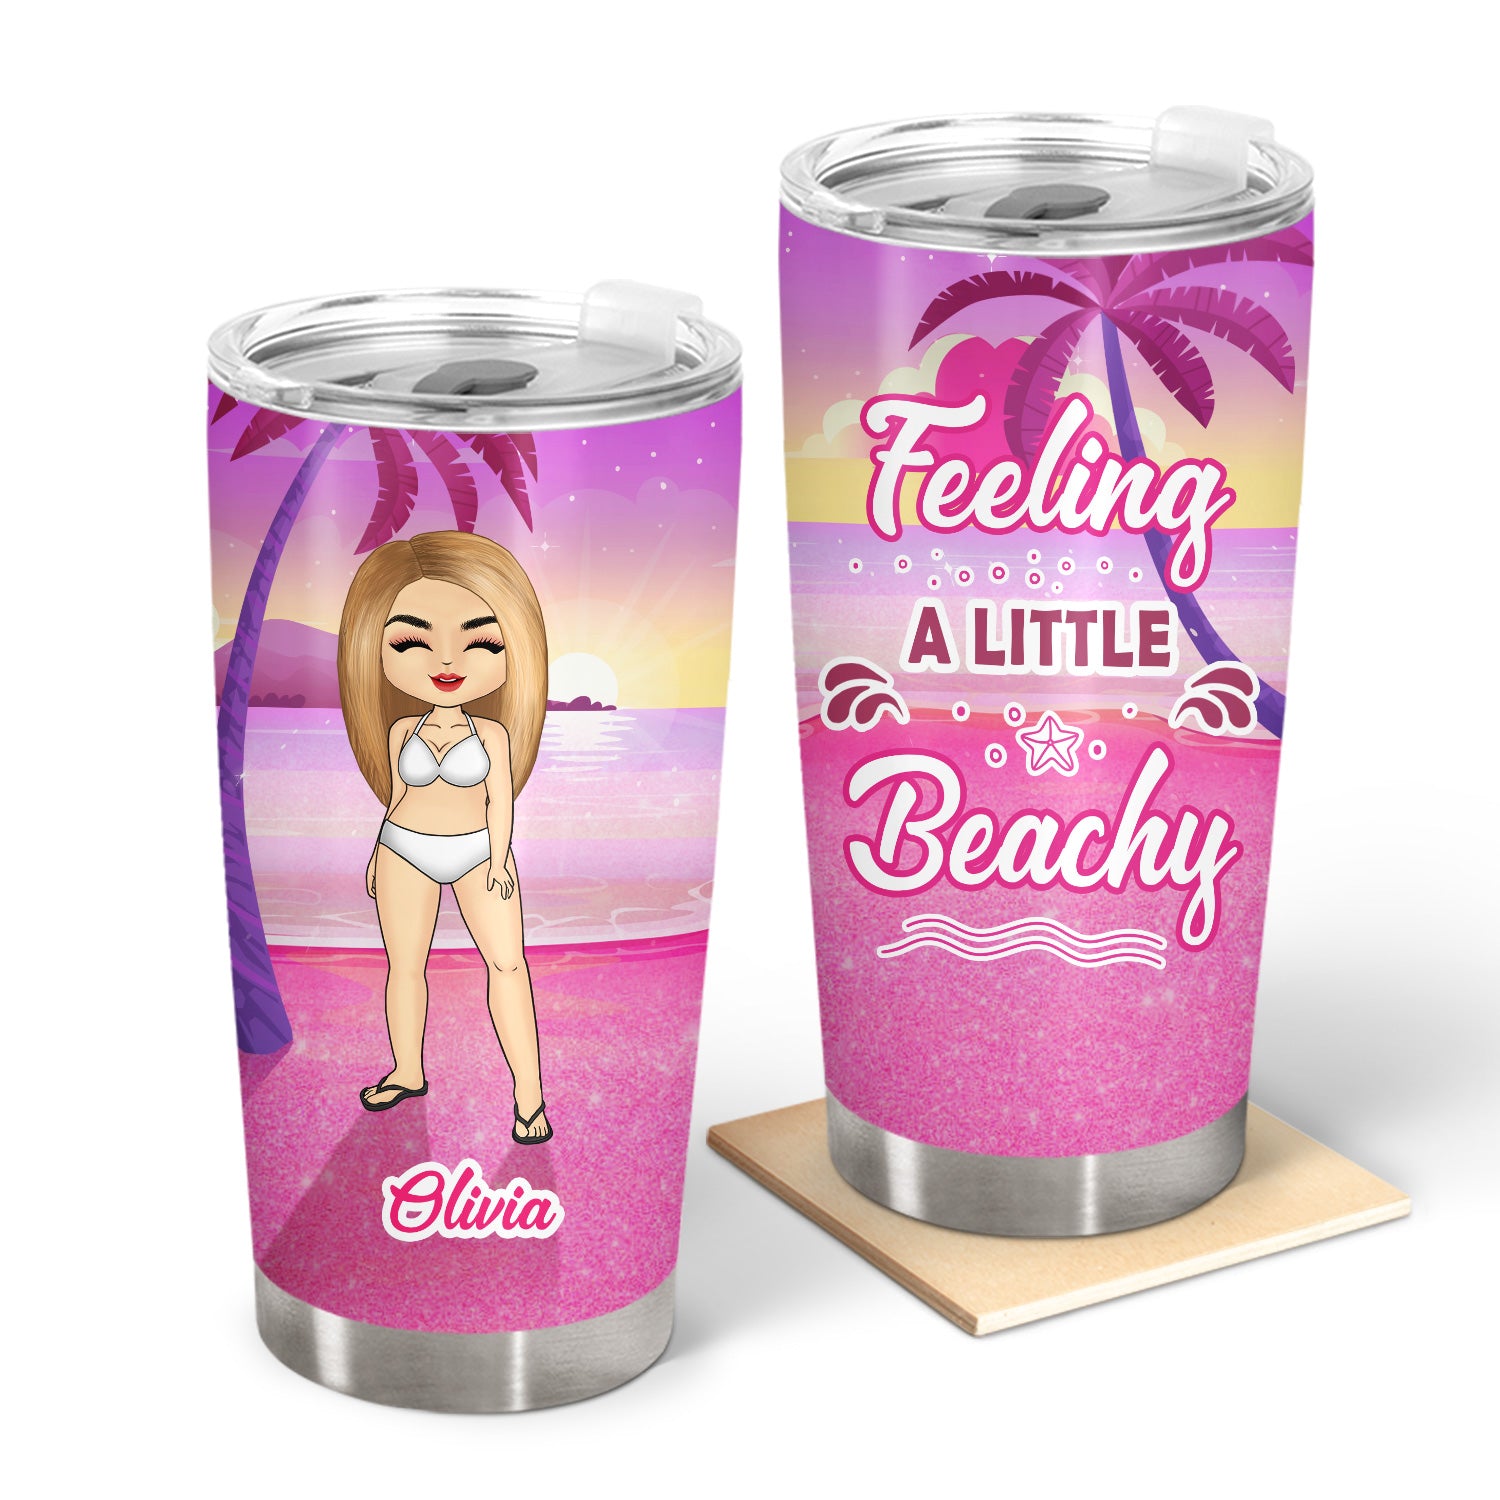 Beach Feeling A Little Beachy - Gift For Yourself, Gift For Women - Personalized Tumbler